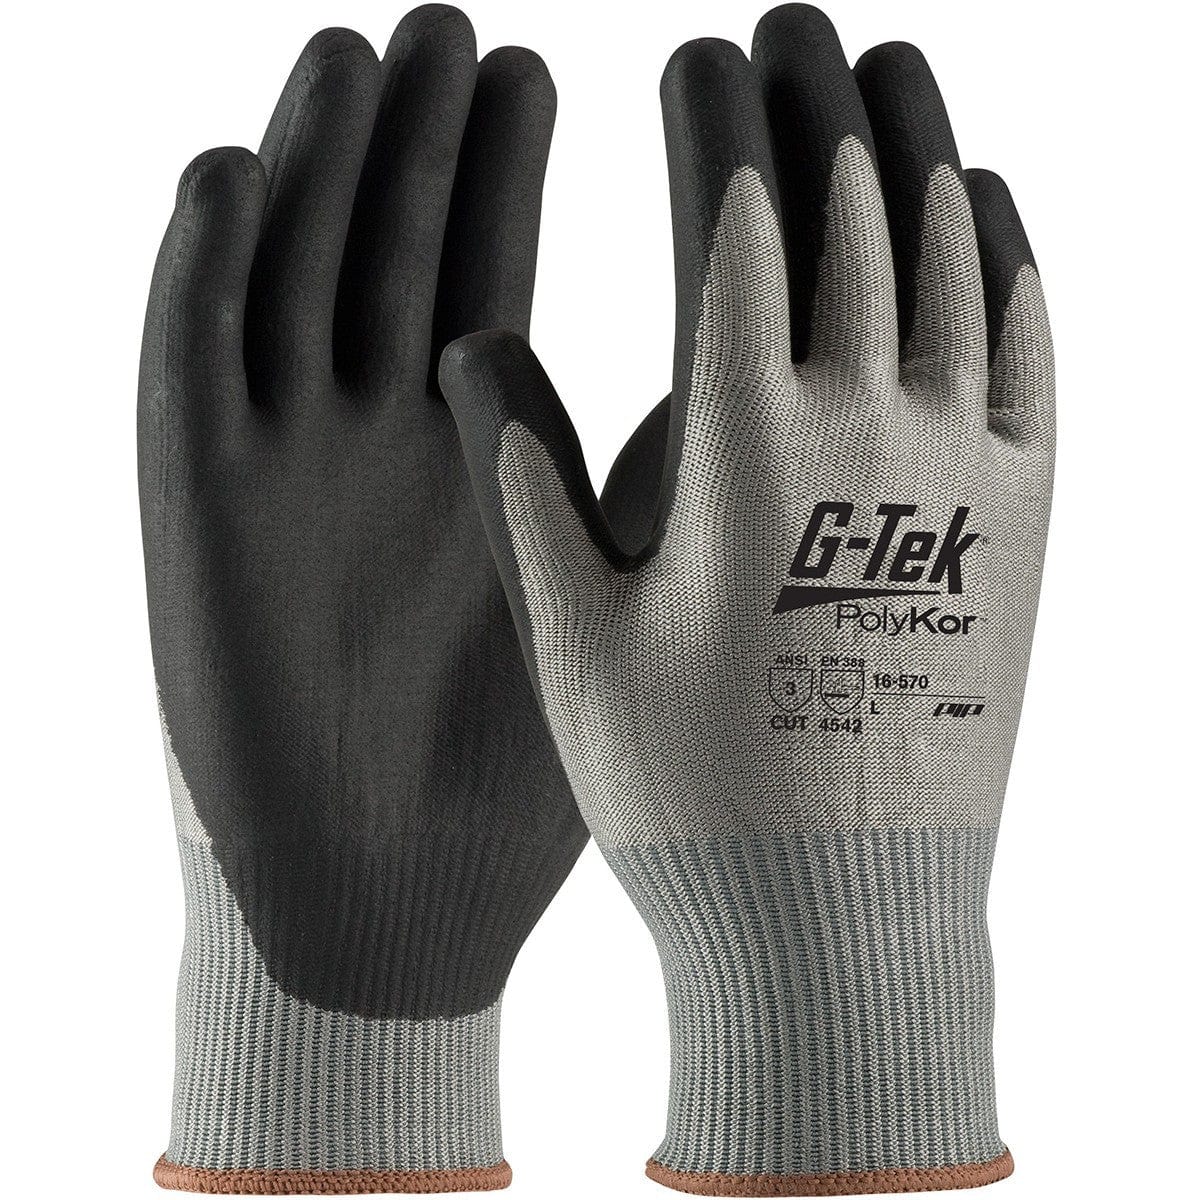 PIP 16-570 G-Tek PolyKor Seamless Knit PolyKor Blended Gloves - Polyurethane Coated Smooth Grip on Palm & Fingers